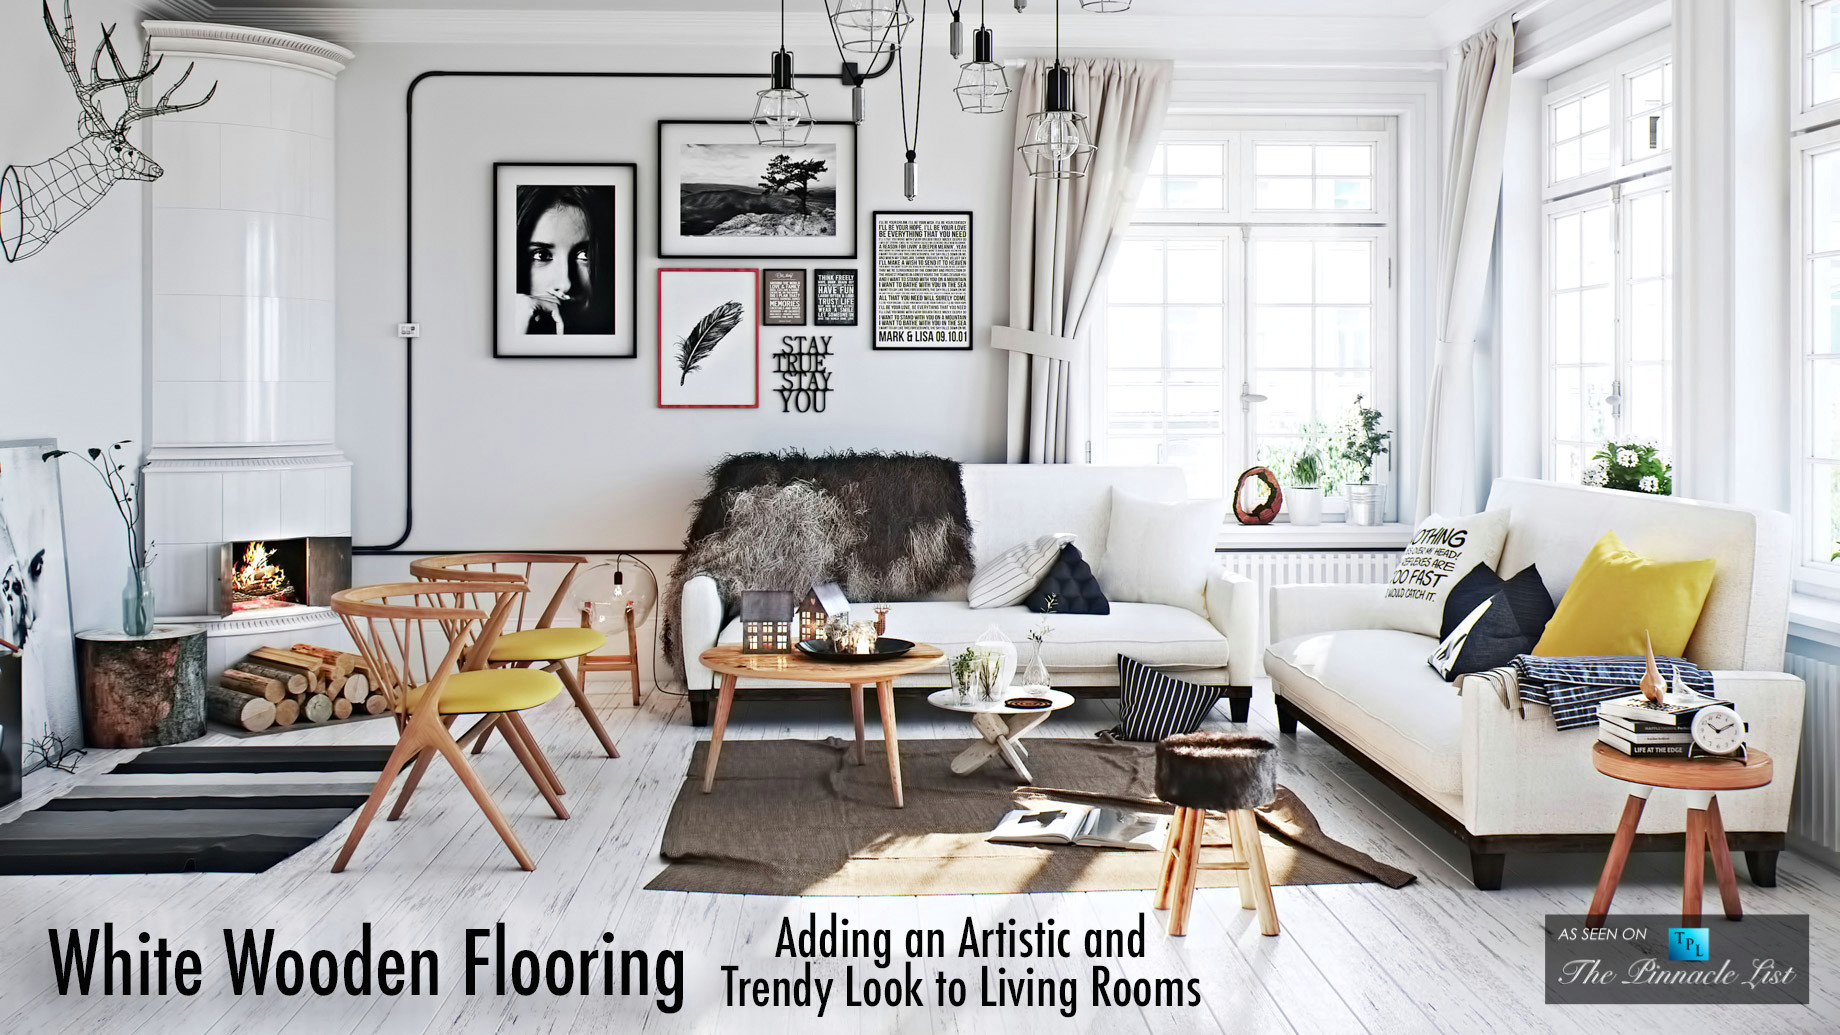 white wooden flooring adding an artistic and trendy look to living rooms the pinnacle list